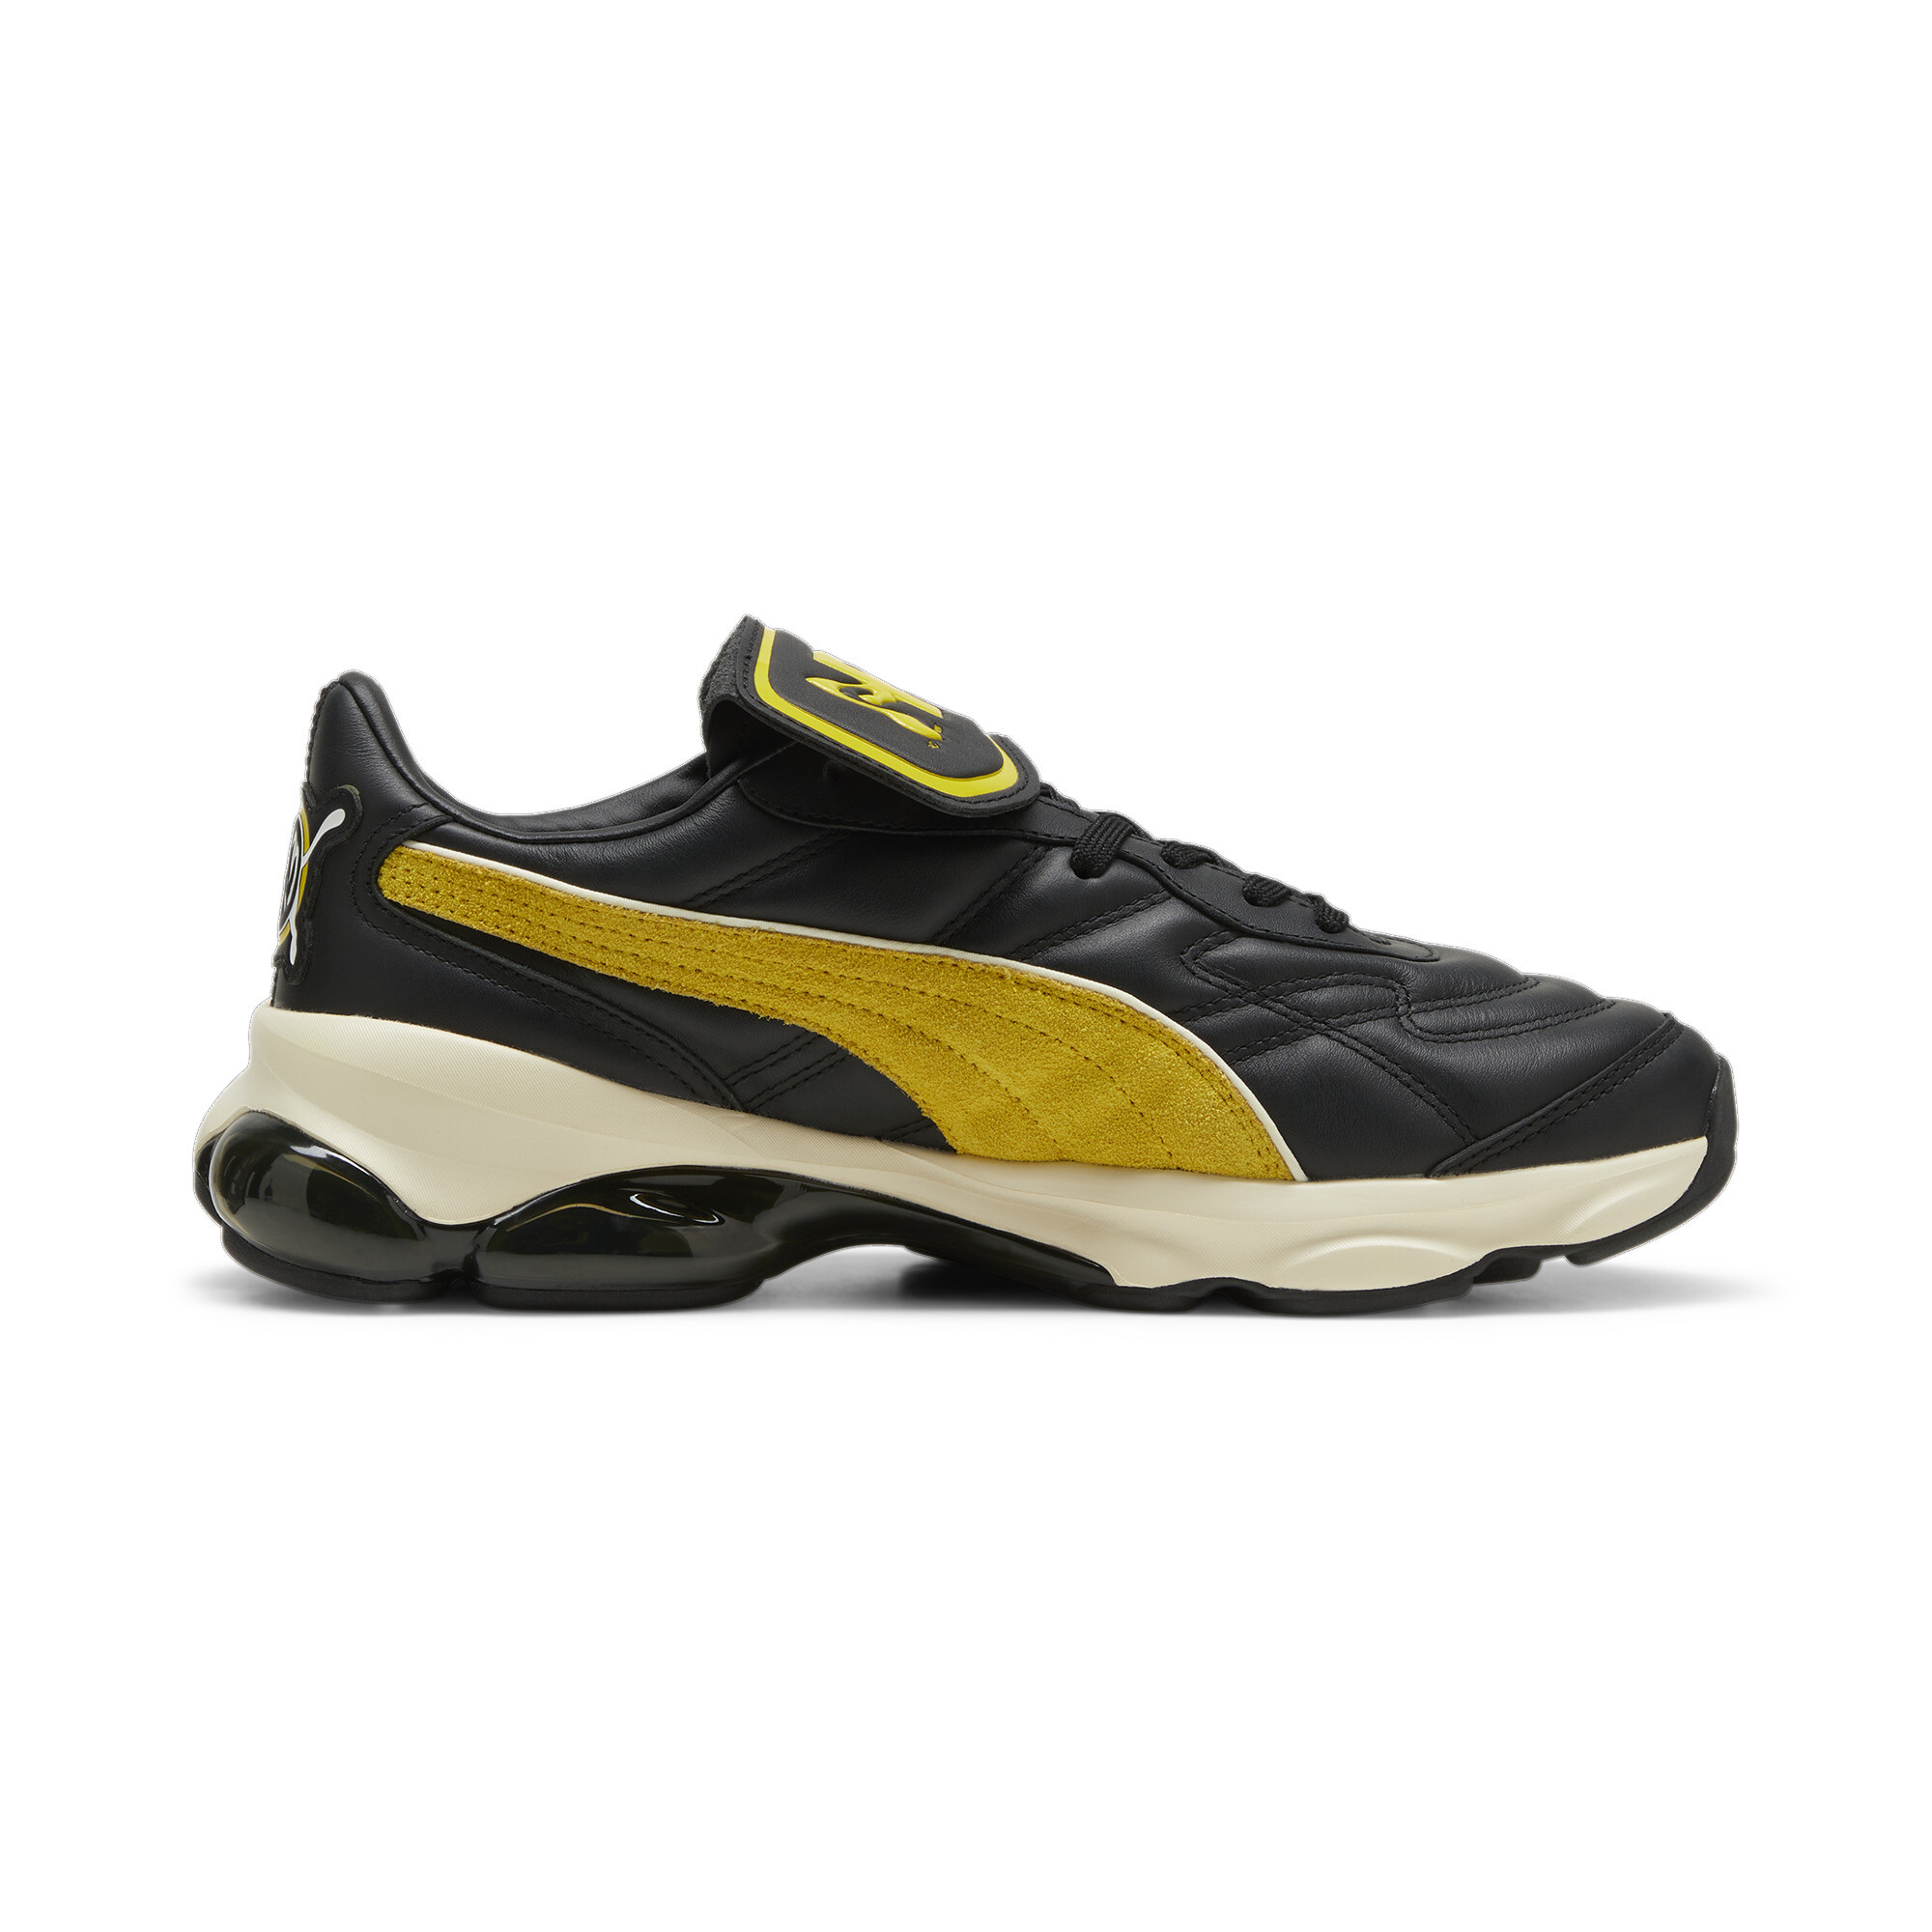 Puma X PERKS AND MINI Cell Dome KING Sneaker, Black, Size 35.5, Shoes